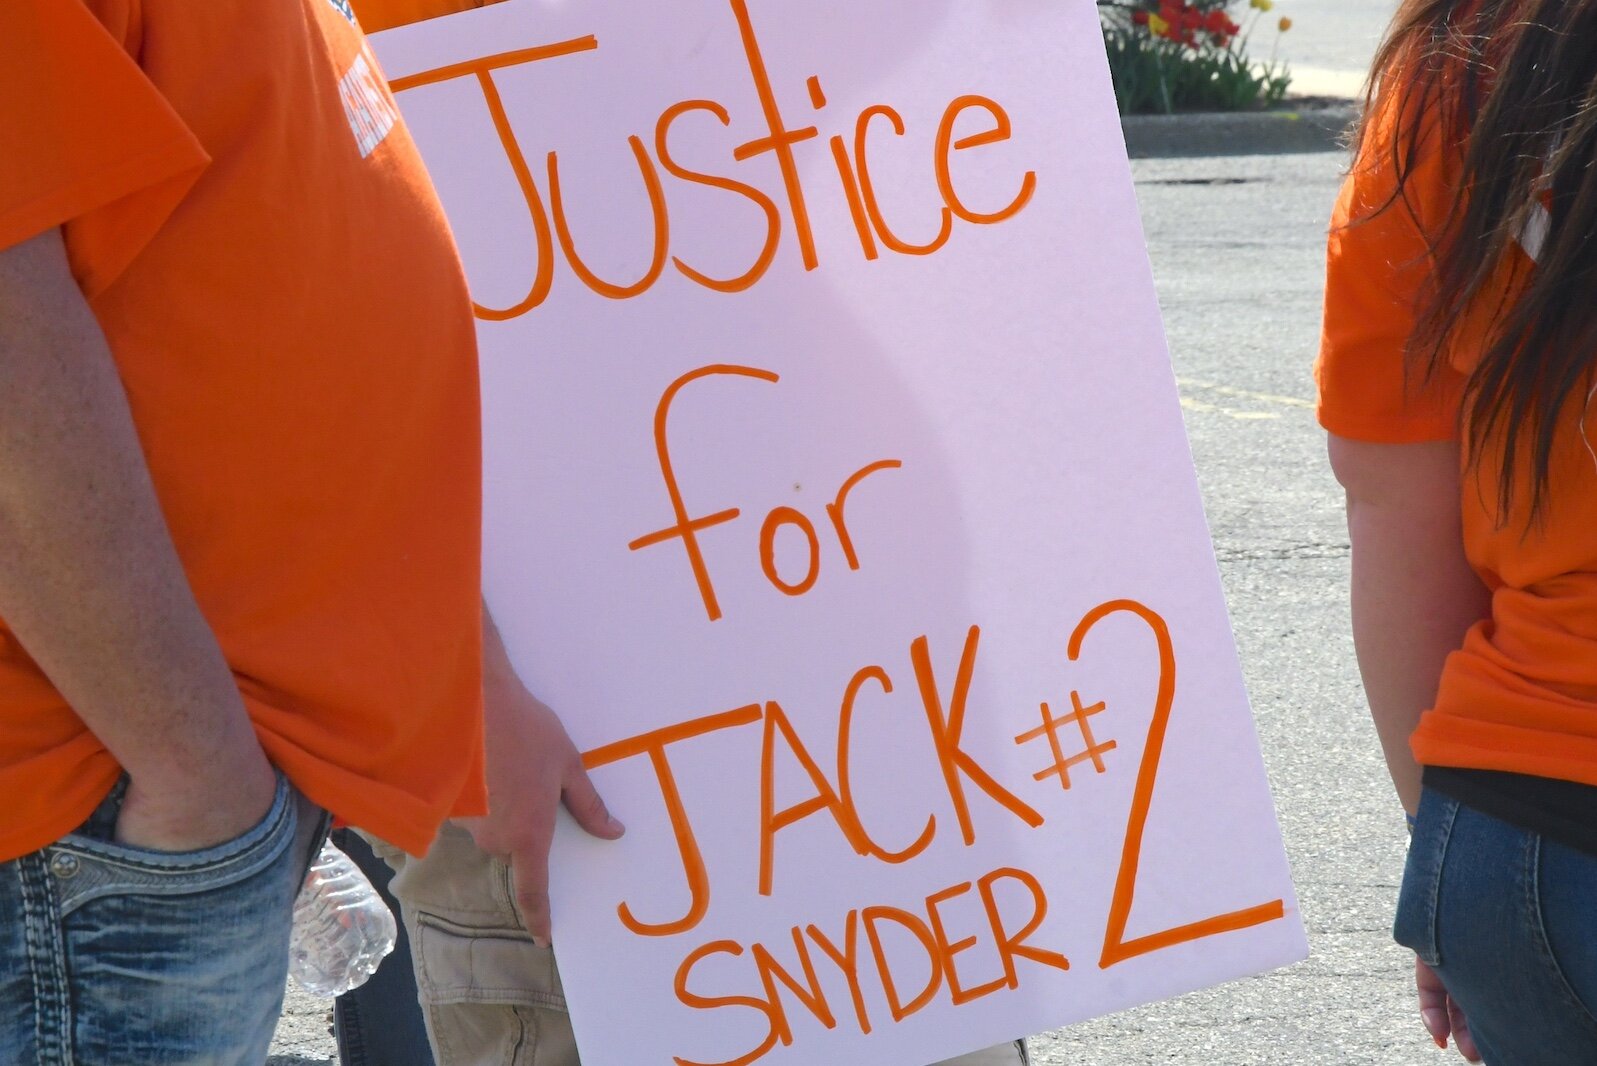 Many participants in the anti-gun violence march and rally wore T-shirts dedicated to Jack Snyder, who was murdered earlier this year. #2 was his number while playing soccer.